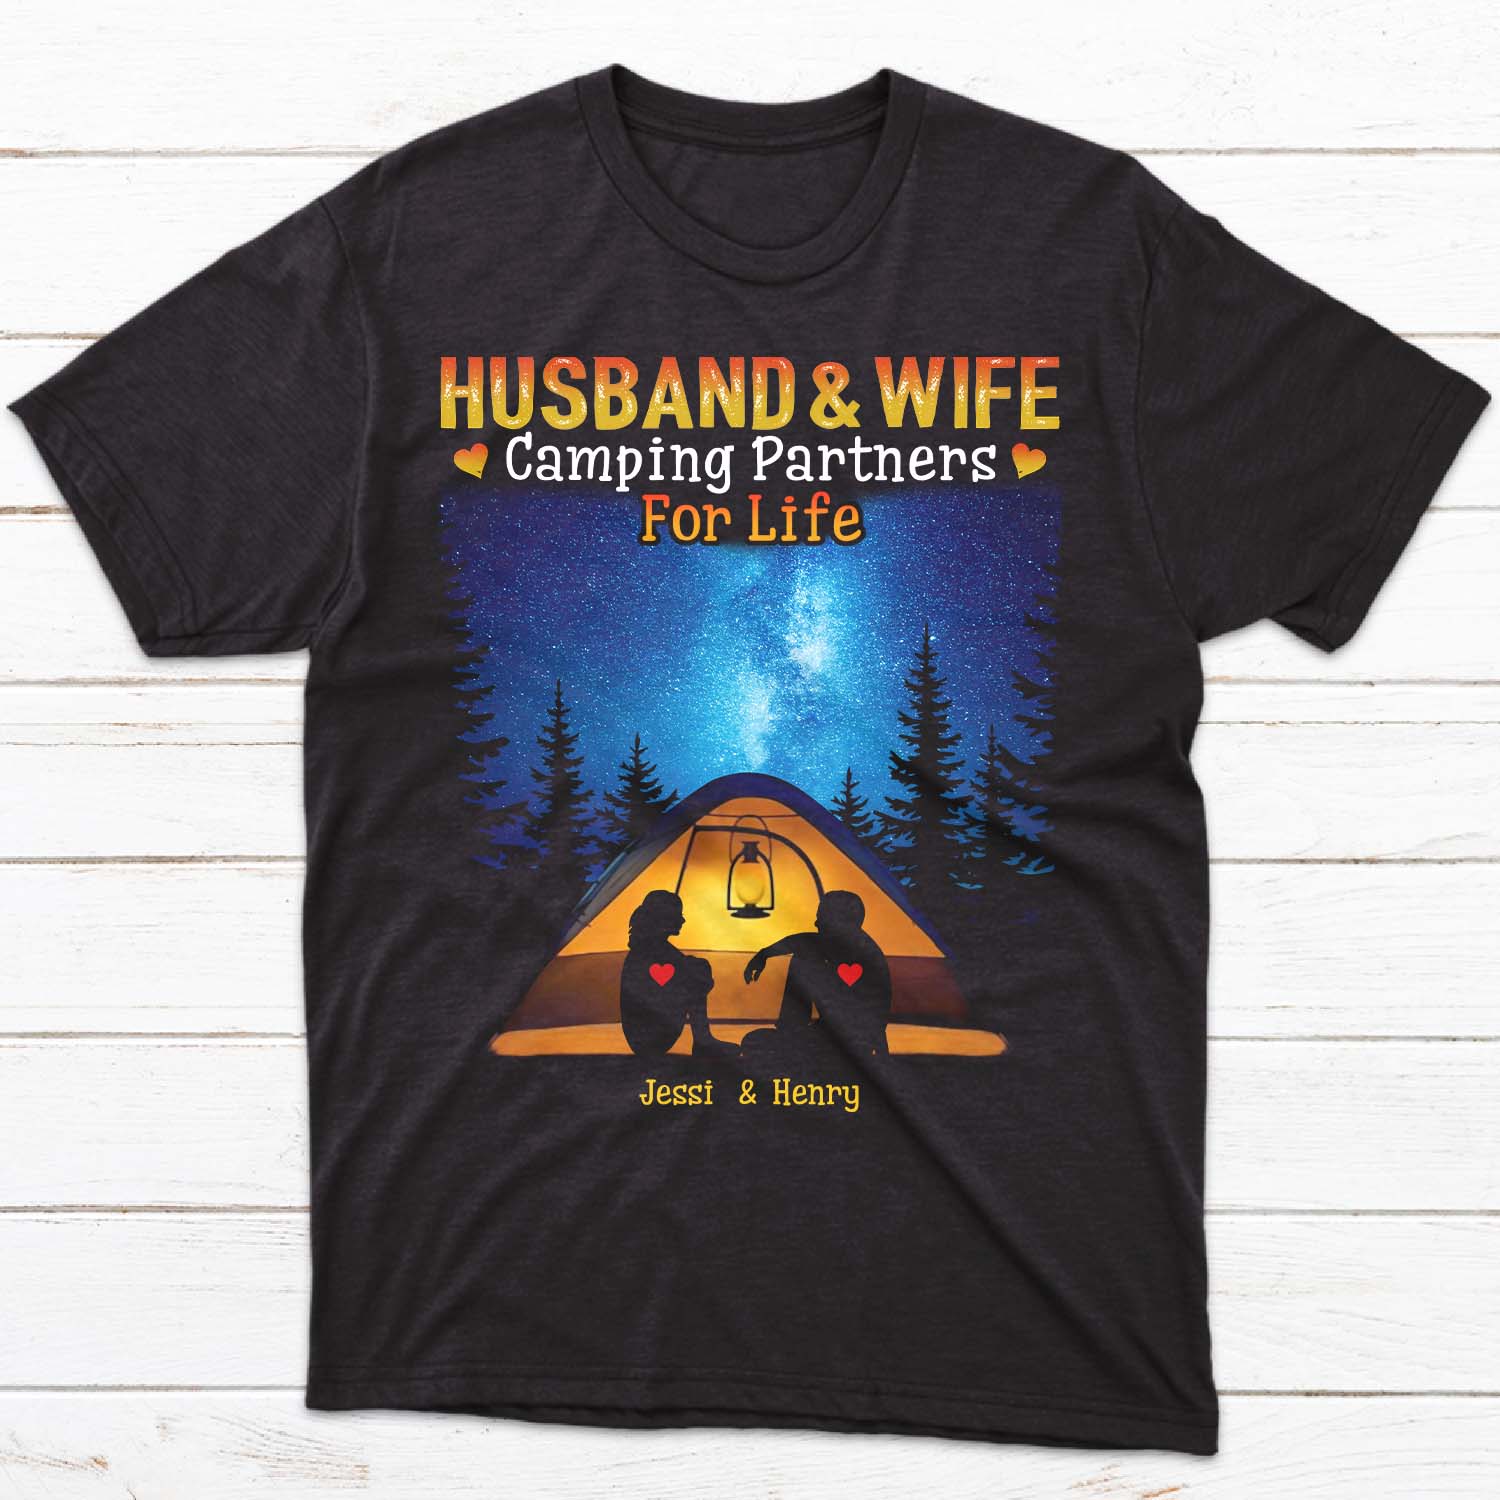 Husband & Wife Camping Partners For Life Personalized Shirt